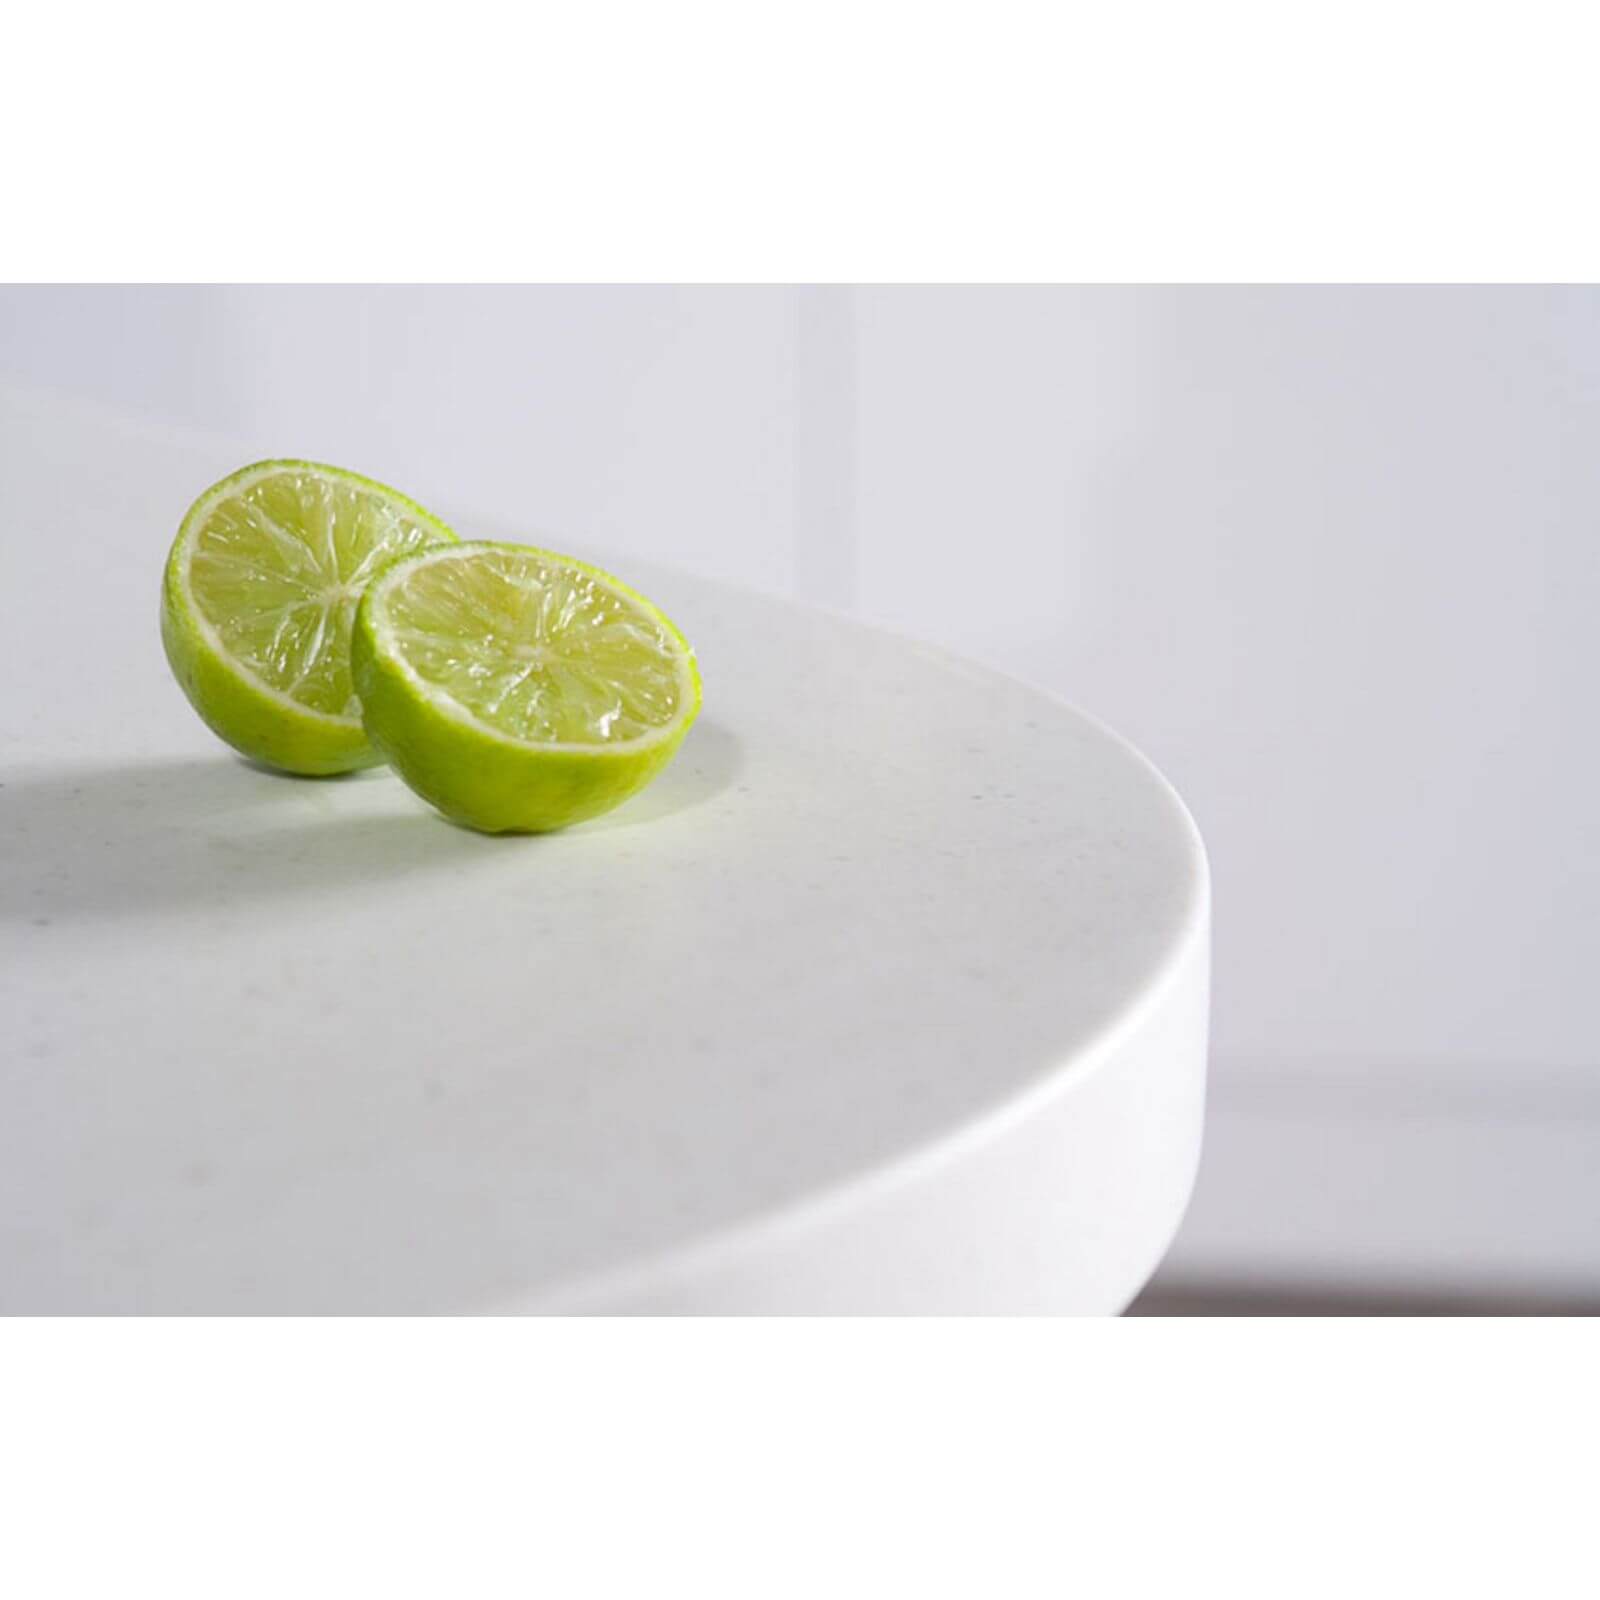 Maia Calcite Kitchen Sink Worktop - Acrylic Right Hand Bowl - 3600 x 650 x 42mm